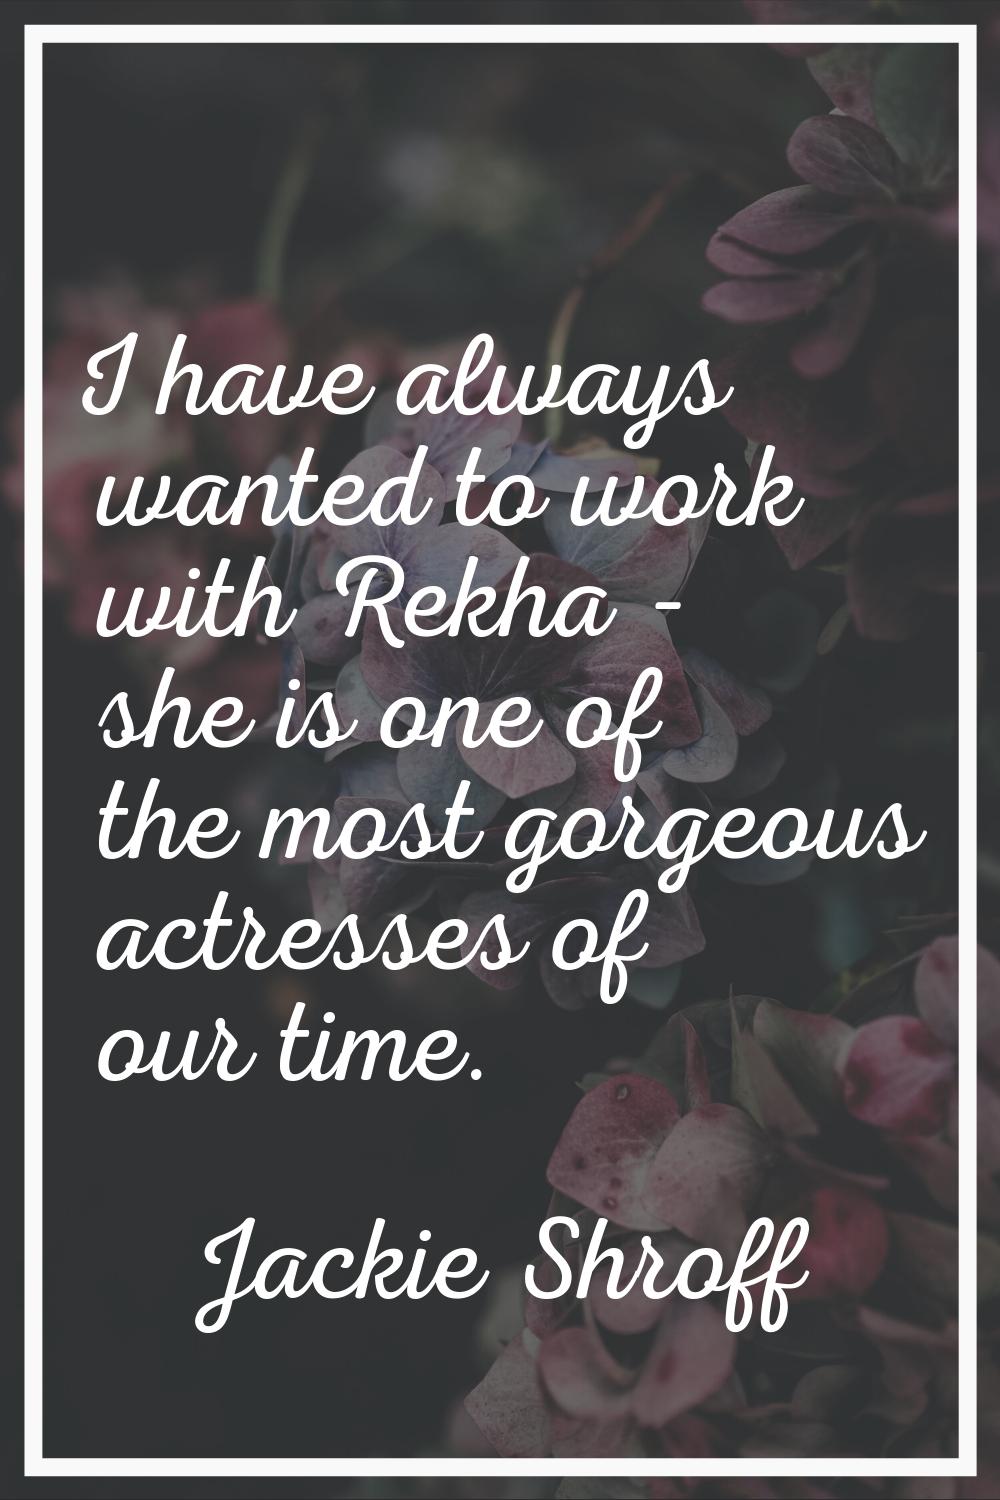 I have always wanted to work with Rekha - she is one of the most gorgeous actresses of our time.